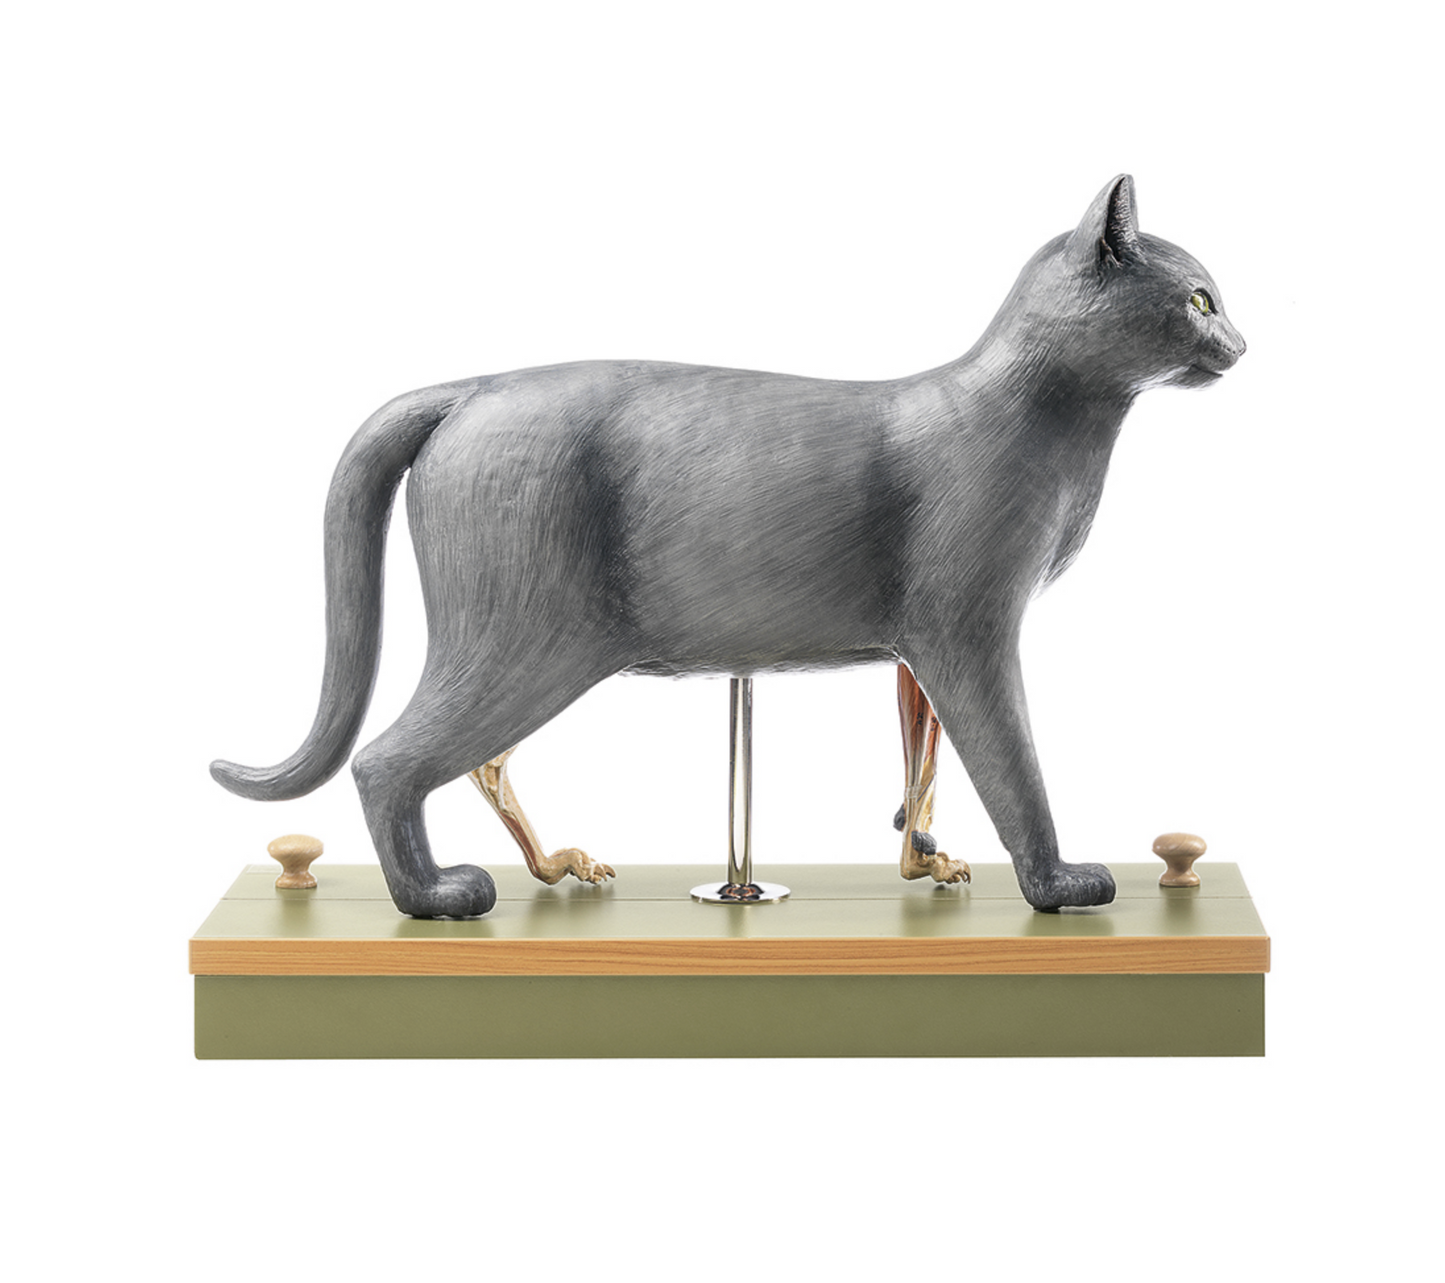 Anatomical model of a cat